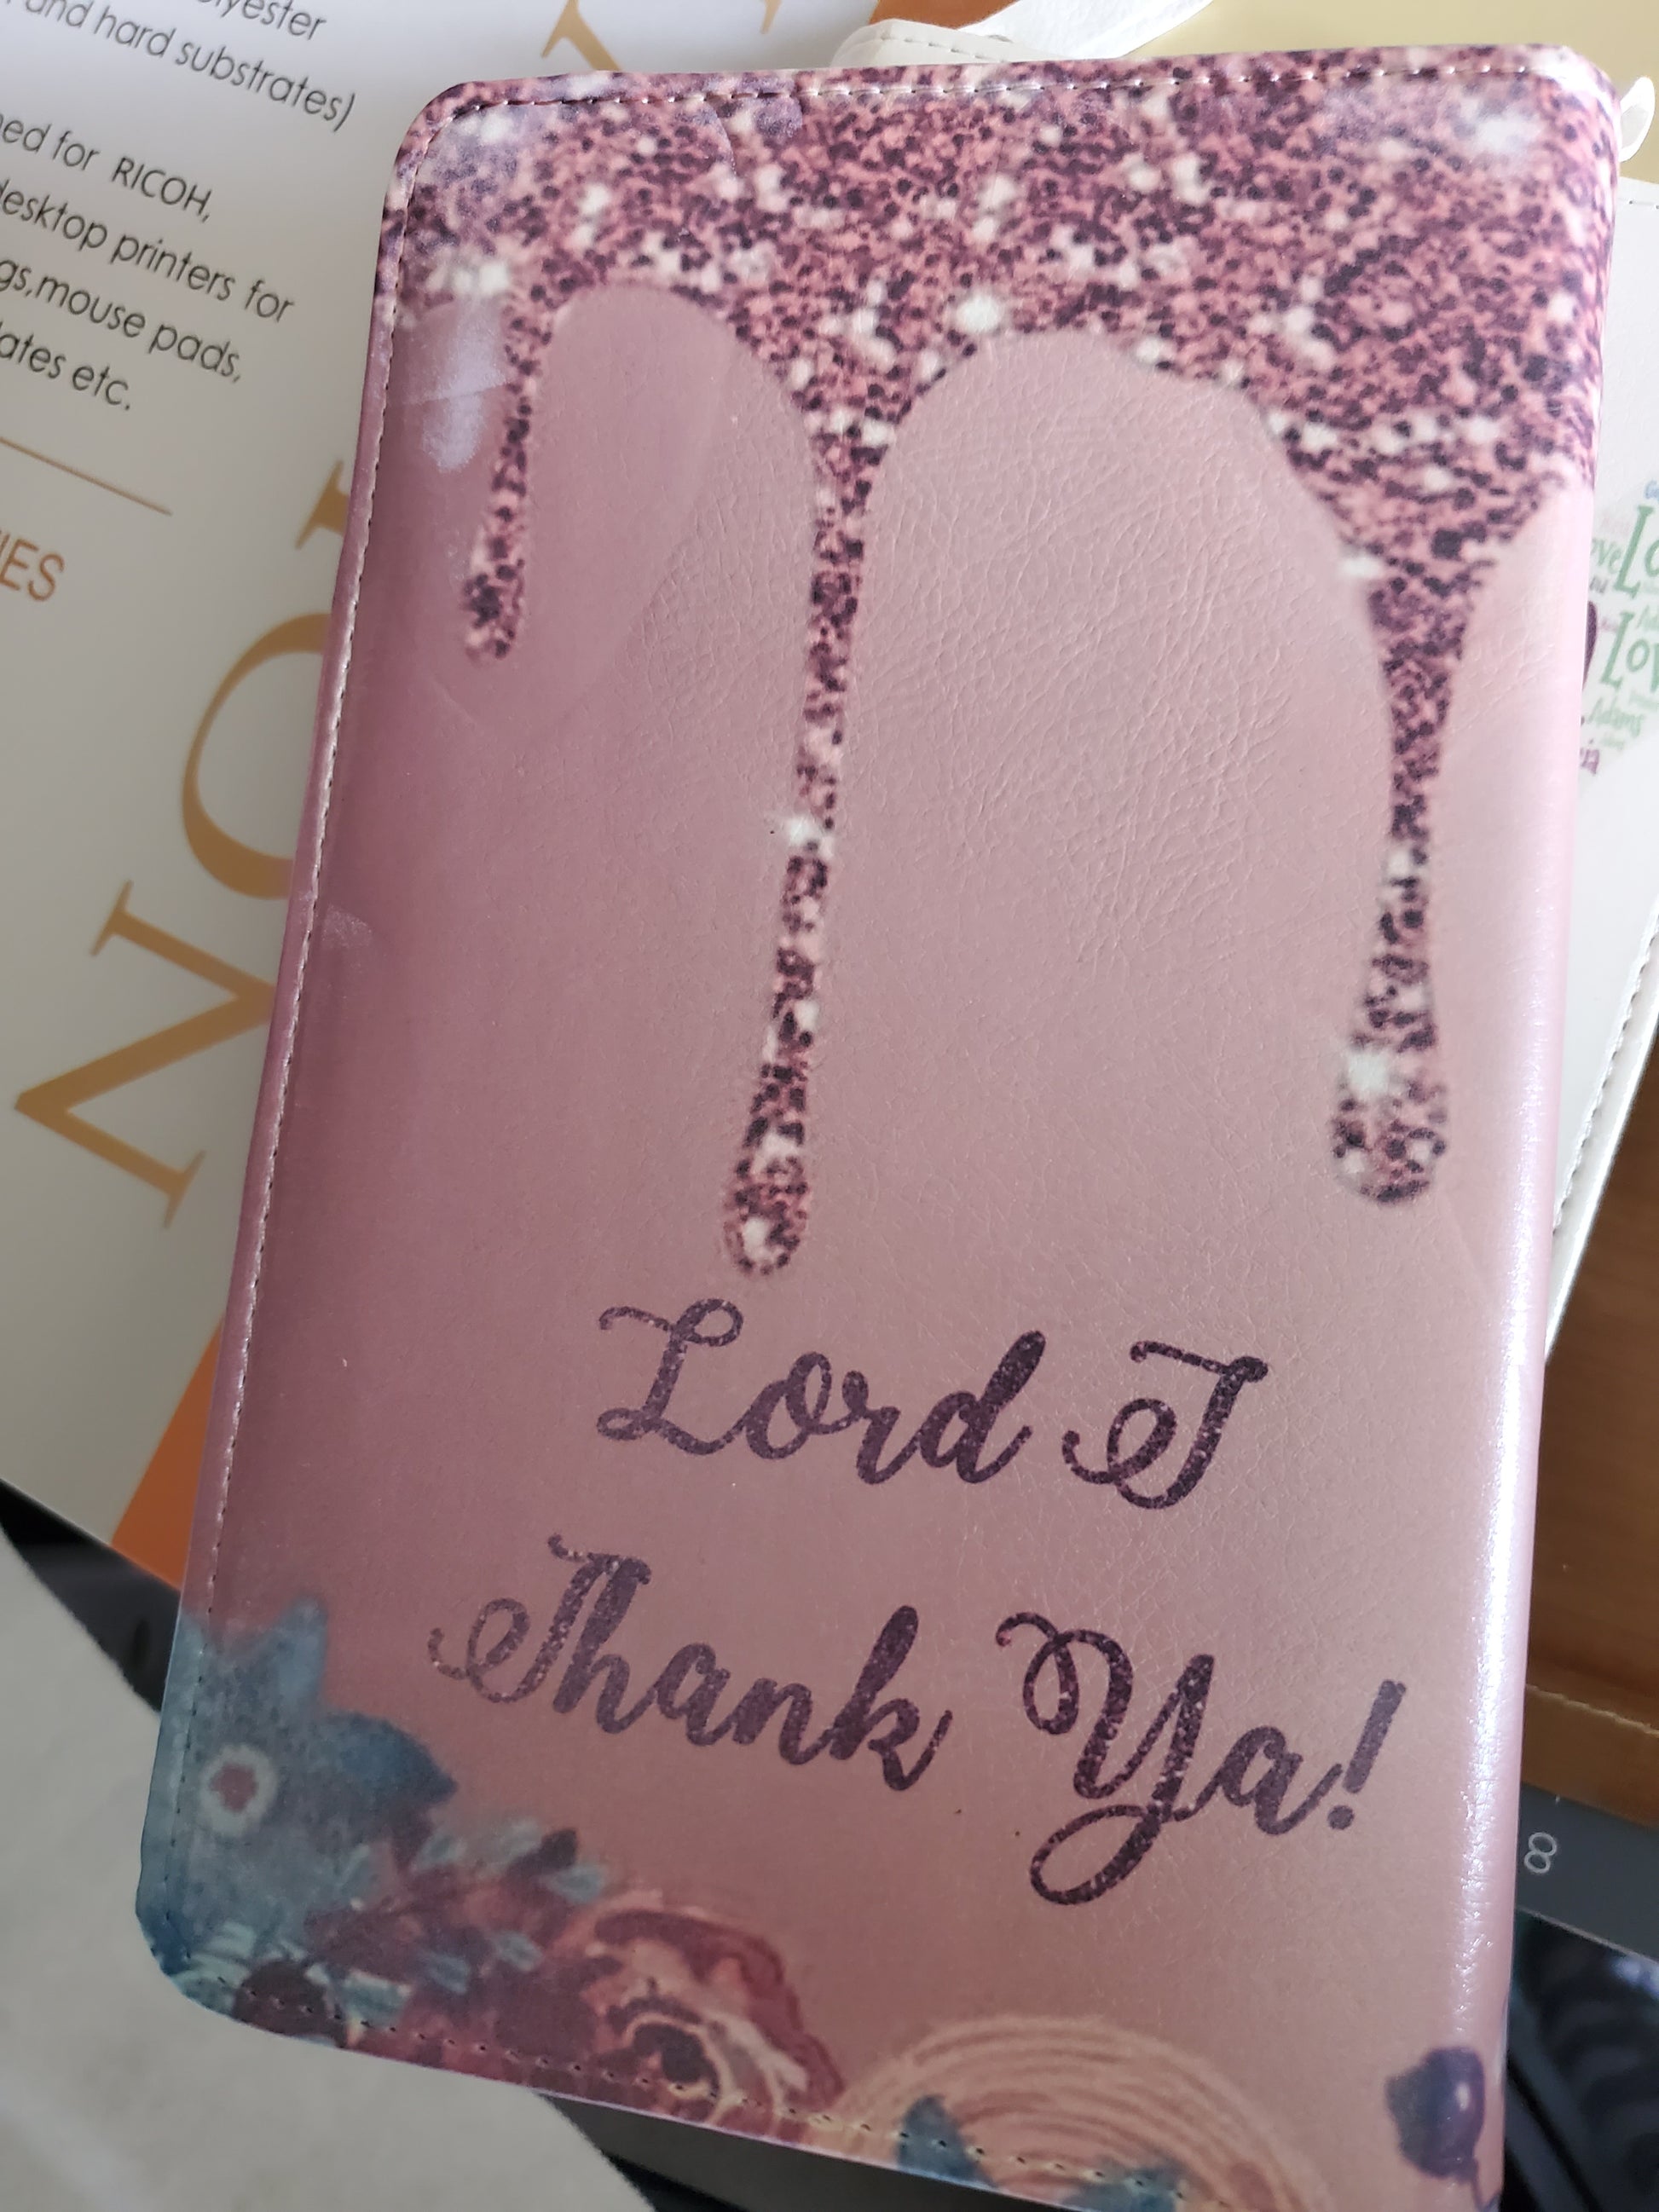 Pink Leatherette Journal with glitter print drip and the words "Lord, I thank ya" at the bottom.